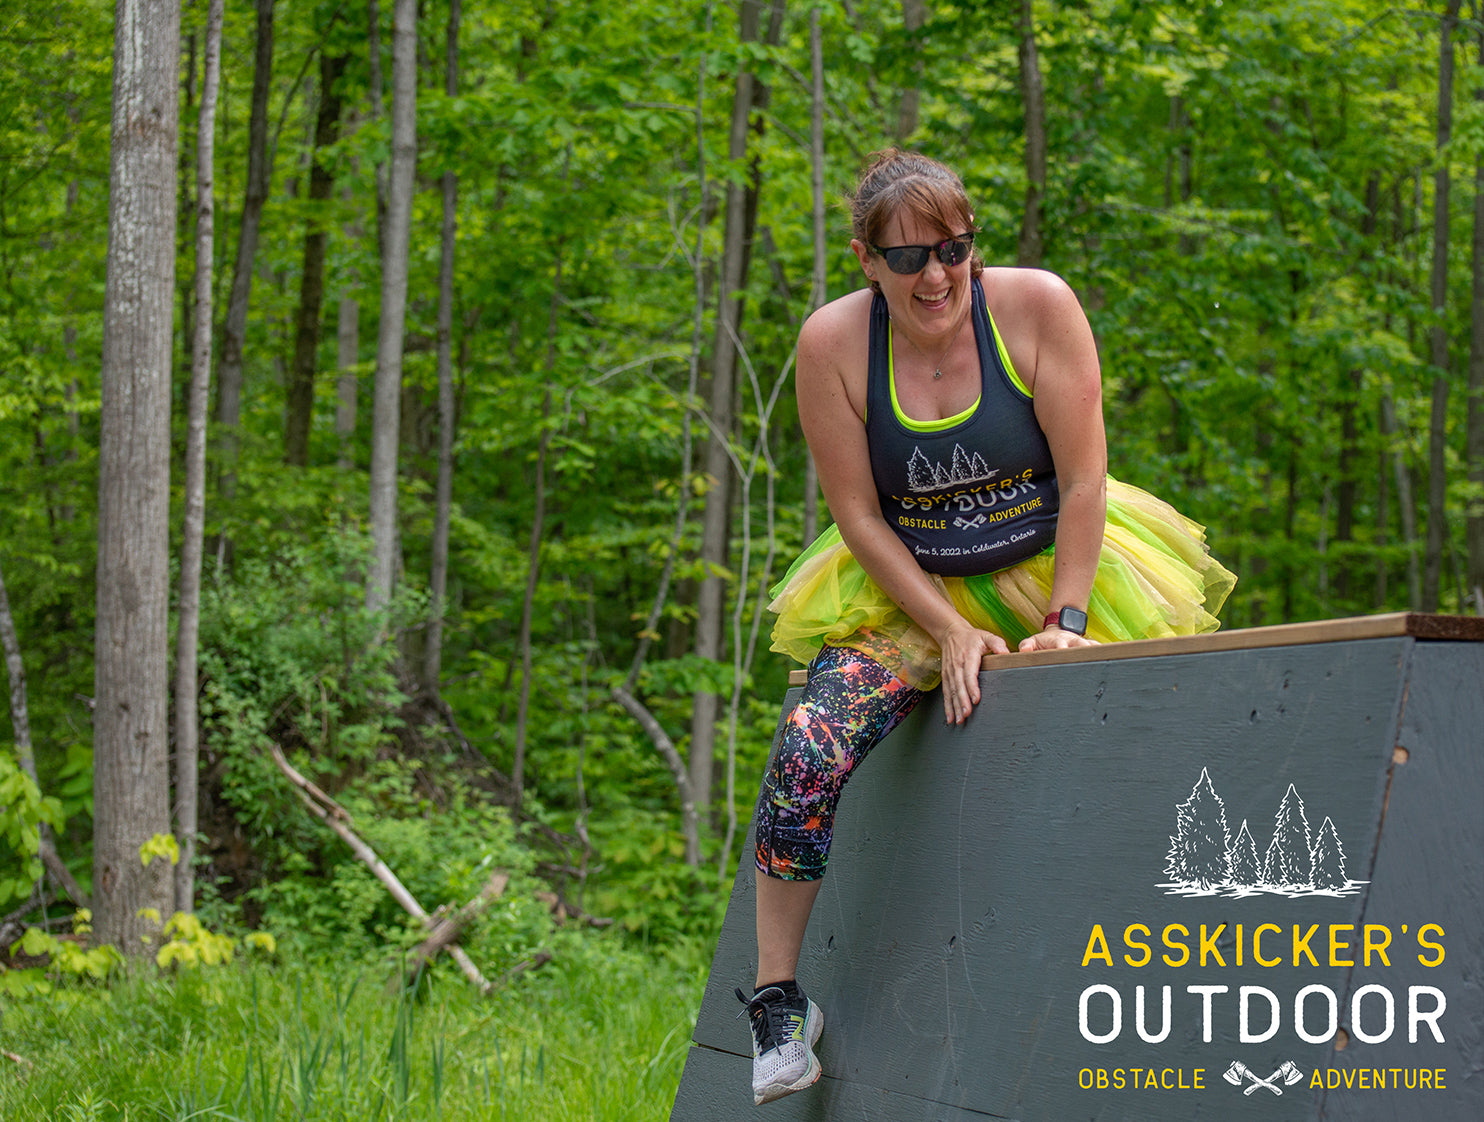 2022 - First Annual Asskicker's Outdoor Obstacle Adventure (5k Course)